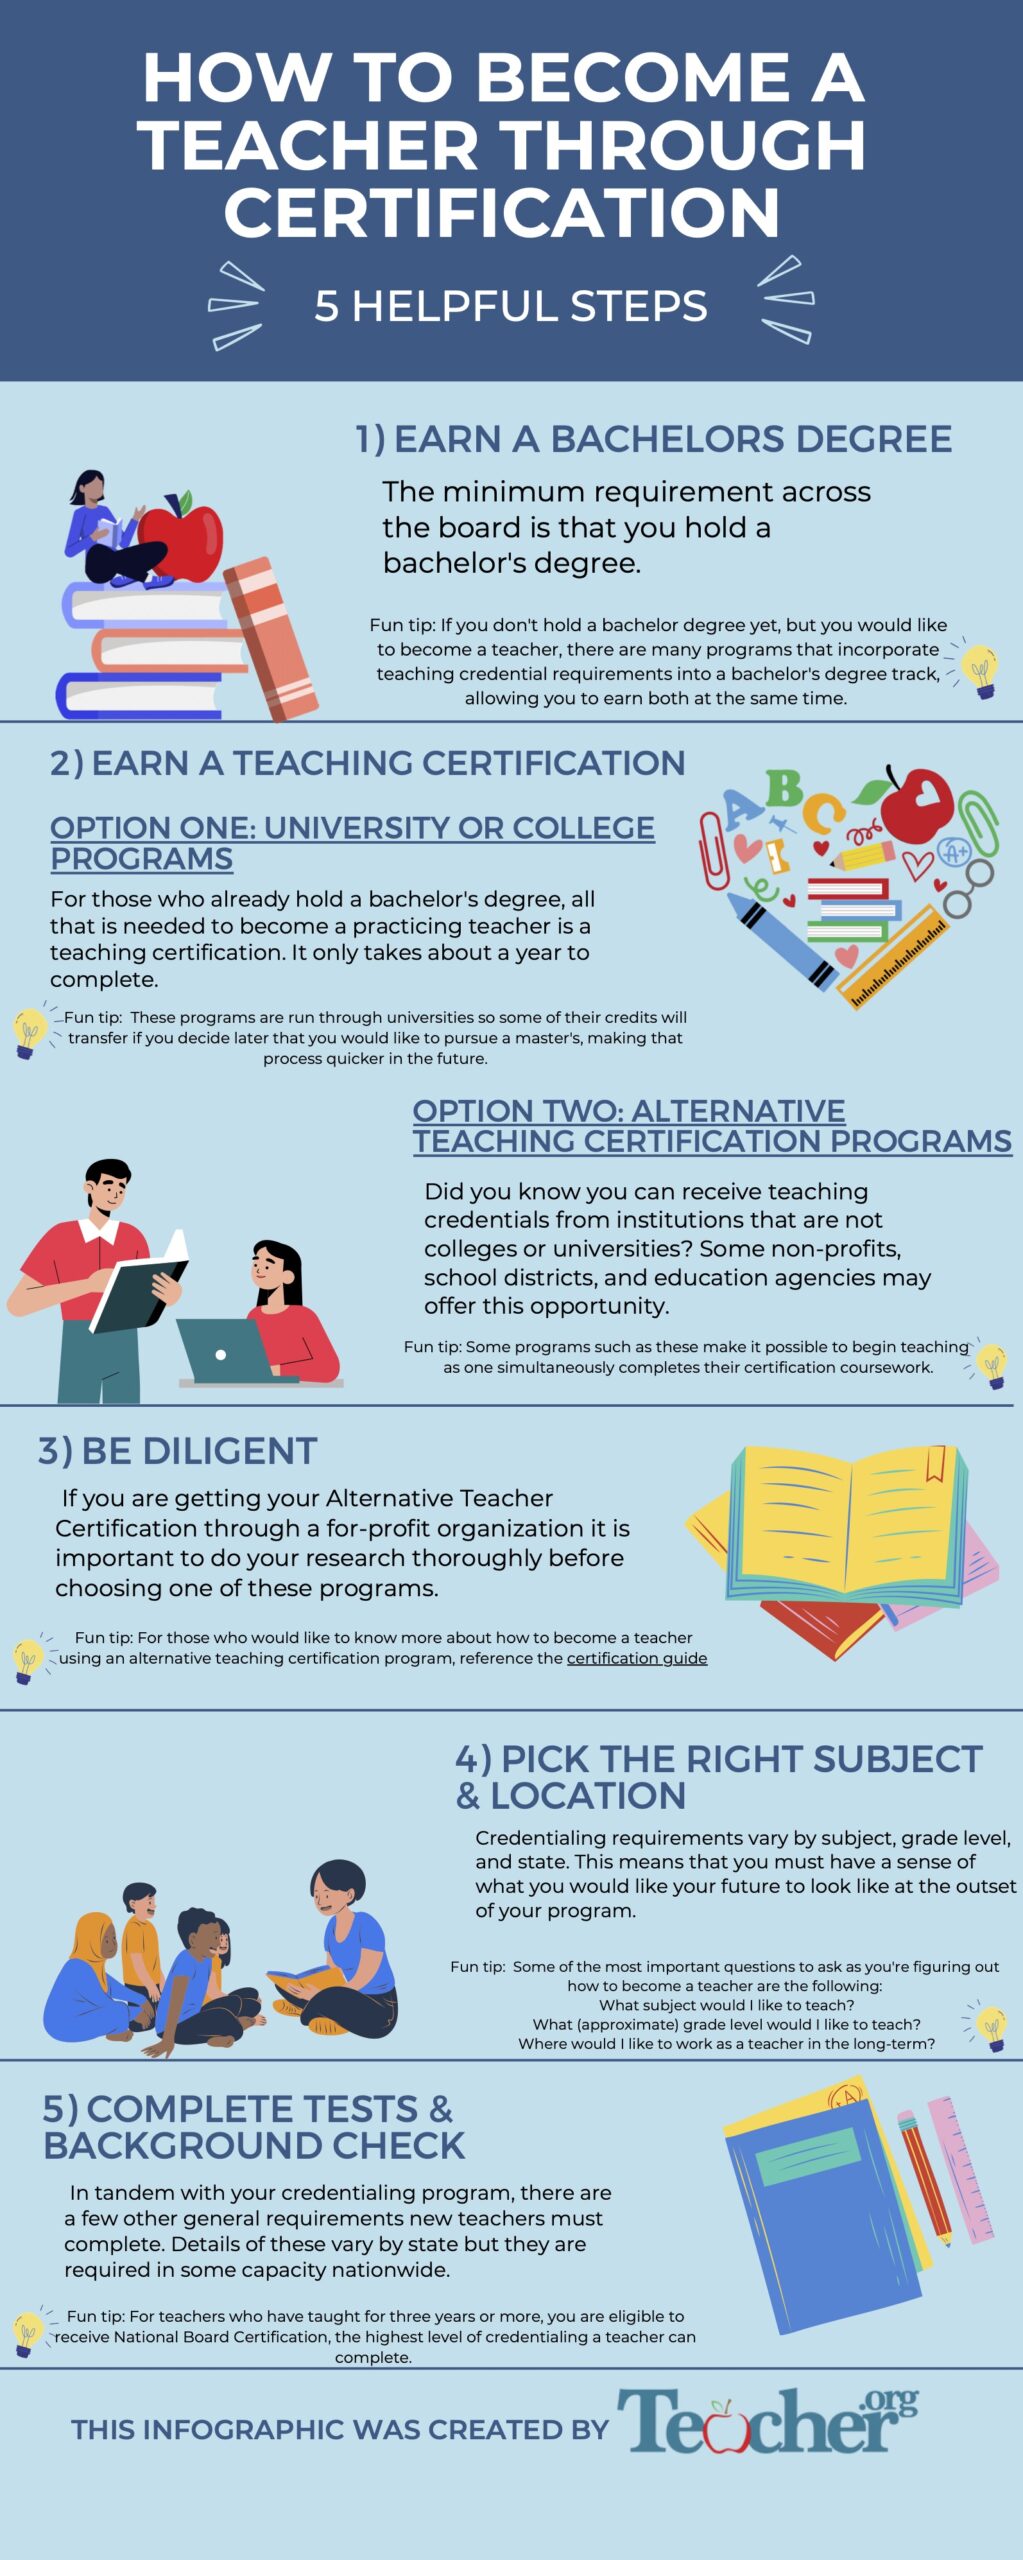 How to Become a Teacher Through Certification: An Infographic